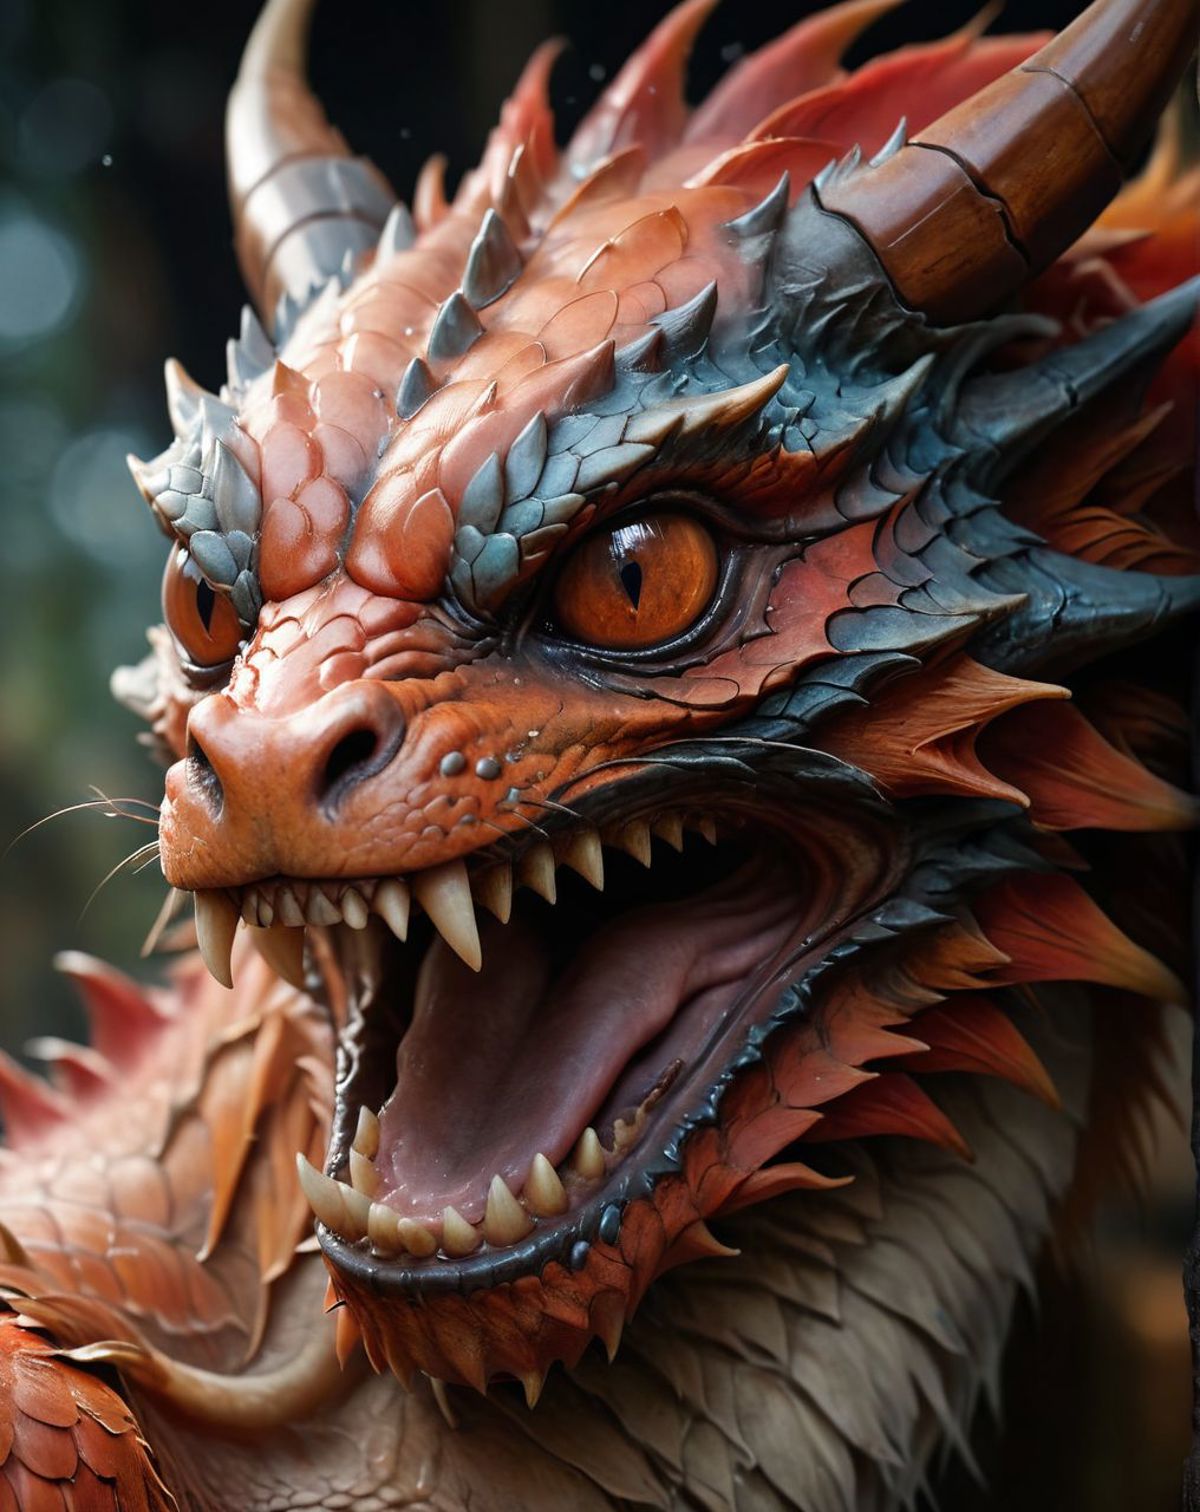 A close-up of a red and blue dragon with sharp teeth and a menacing expression.